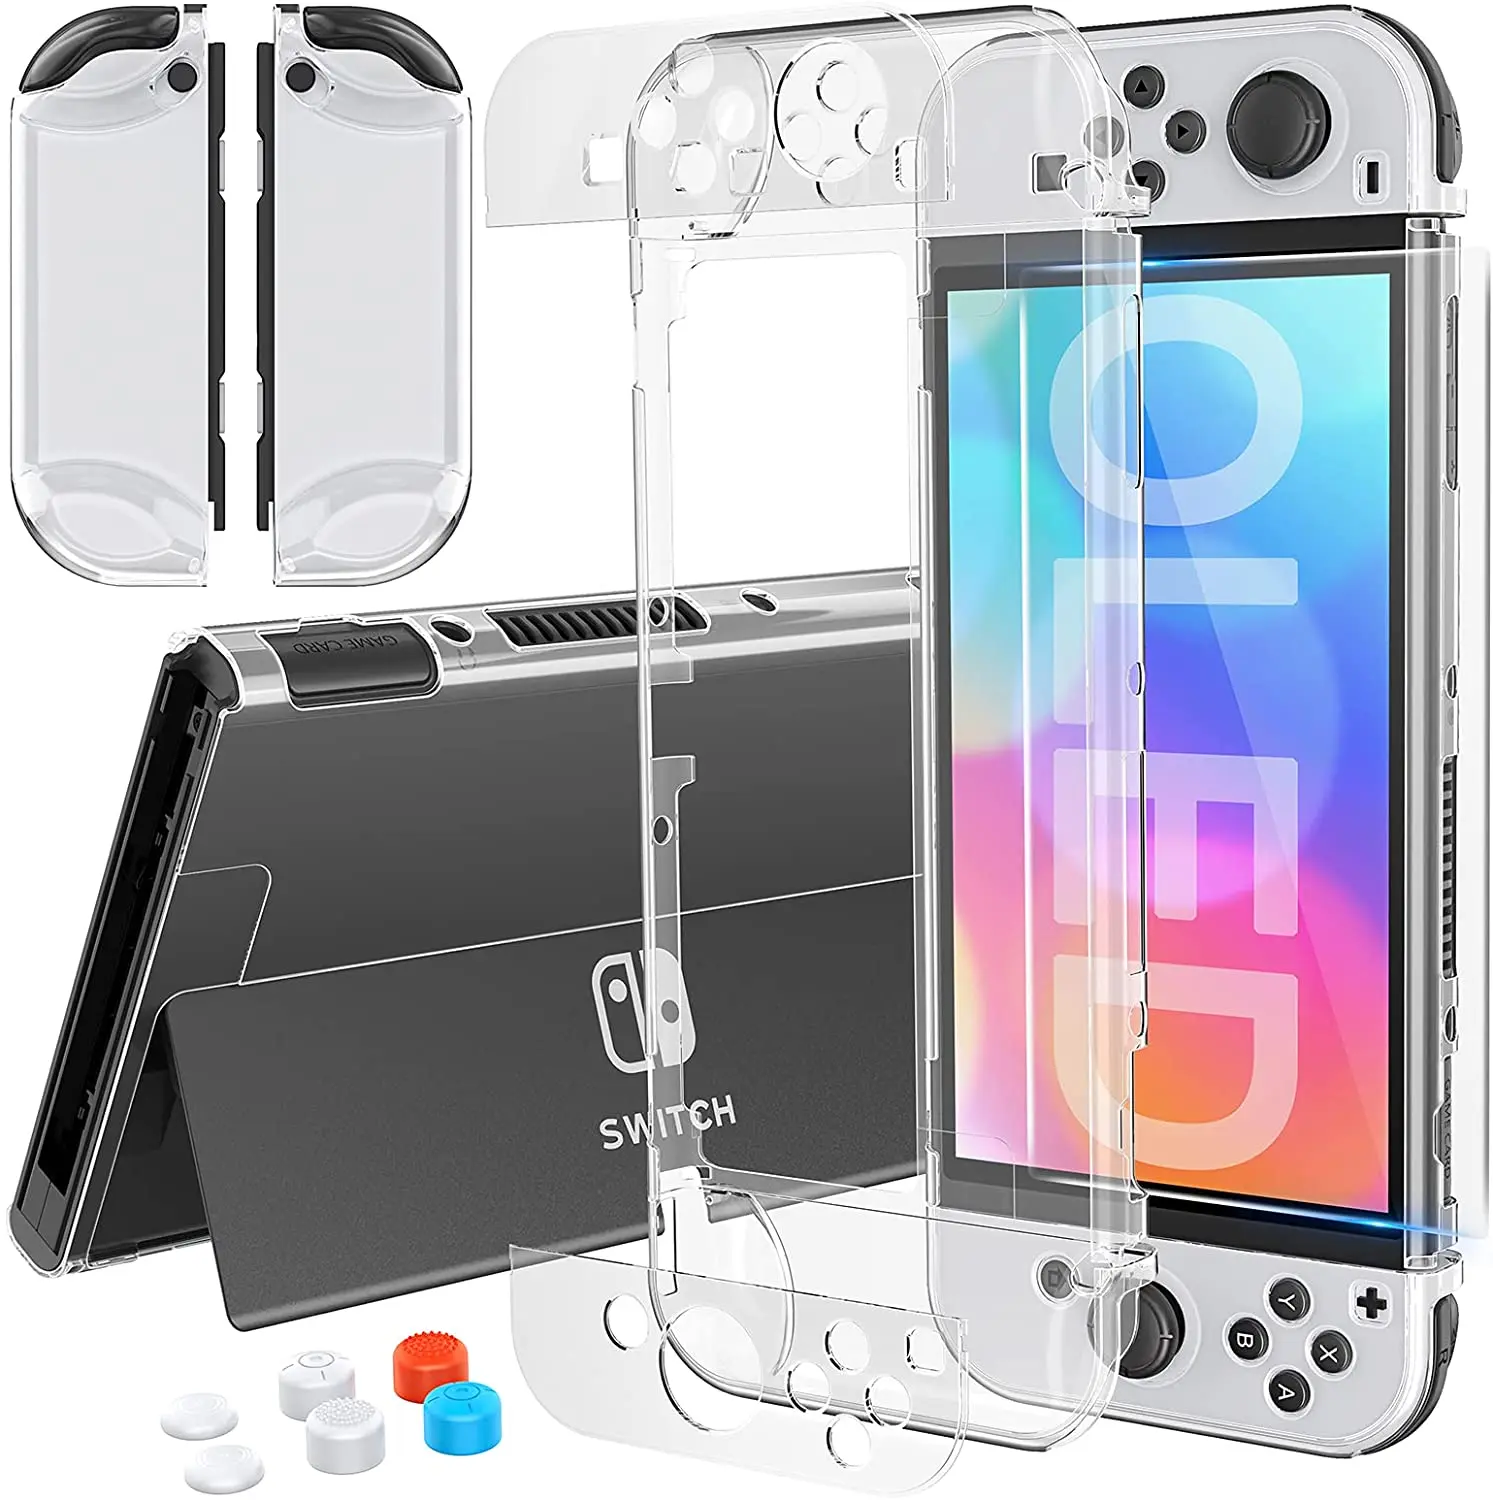 Switch Oled Case Screen Protector | Comes Nintendo Switch Oled - Case Switch - Aliexpress